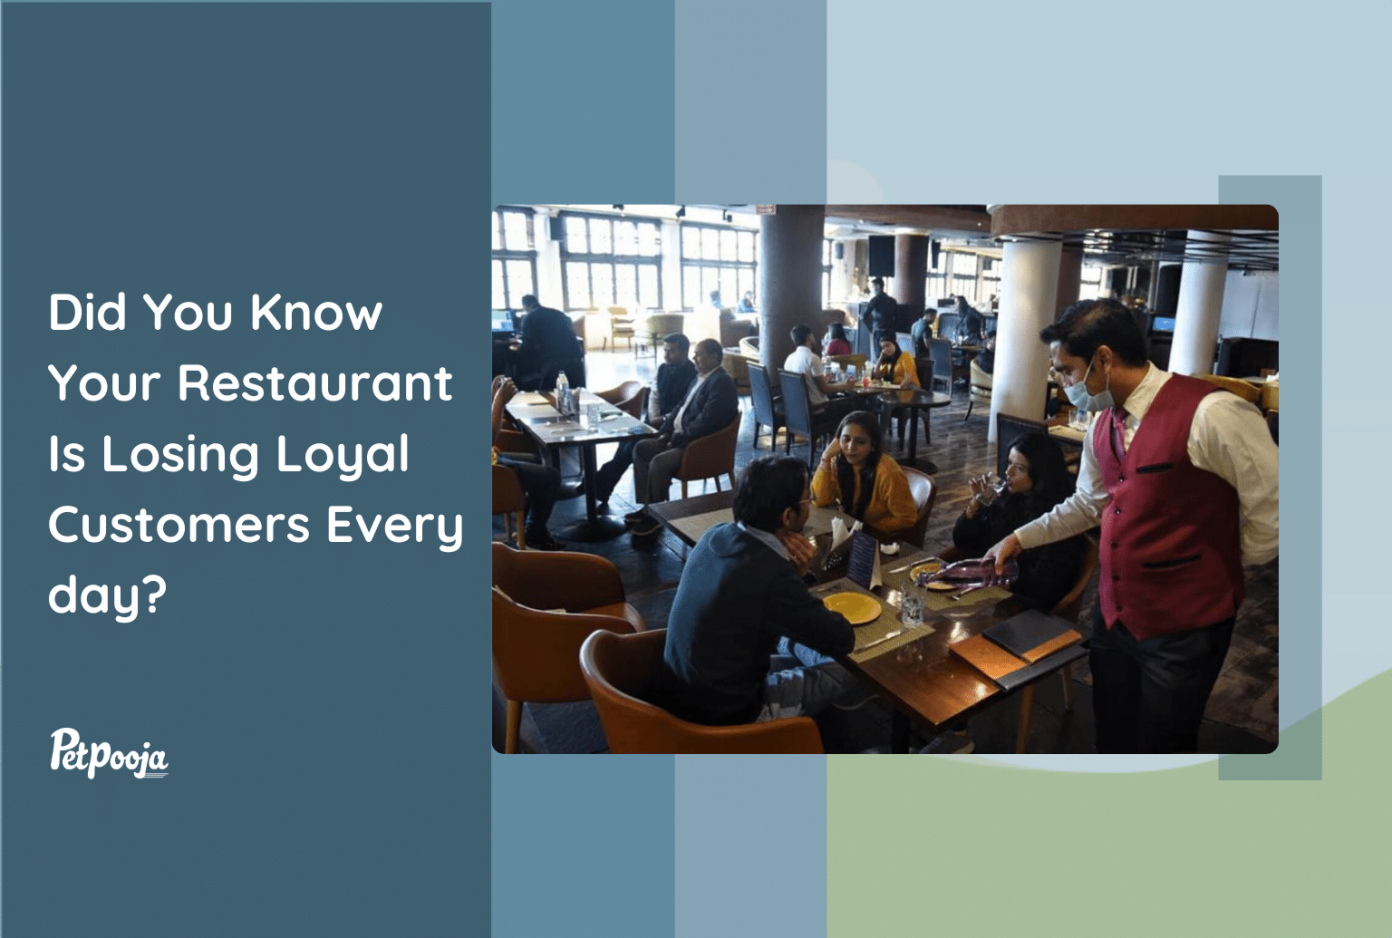 Did You Know Your Restaurant Is Losing Loyal Customers Every day?